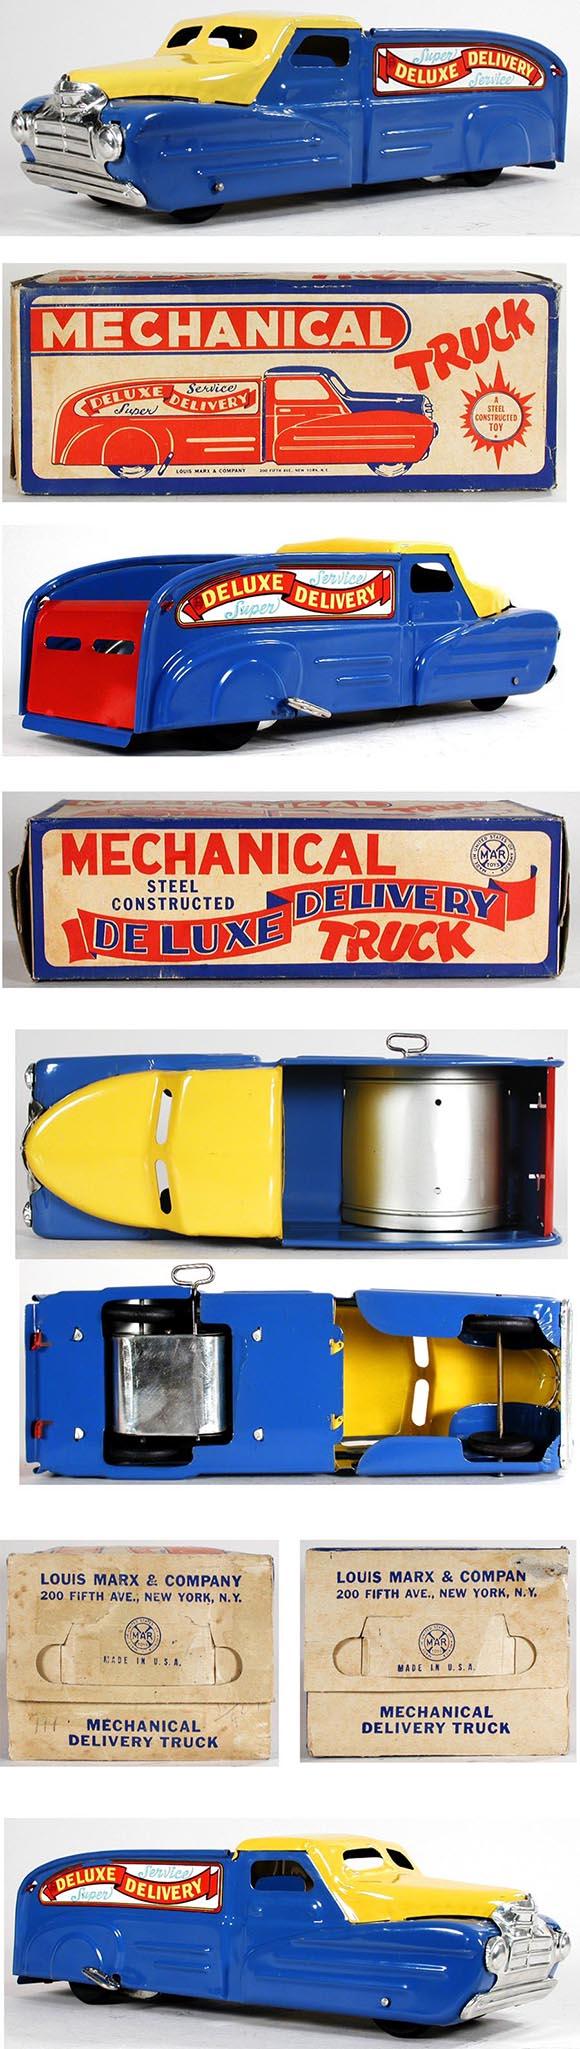 1940 Marx Mechanical Delivery Service Truck in Original Box